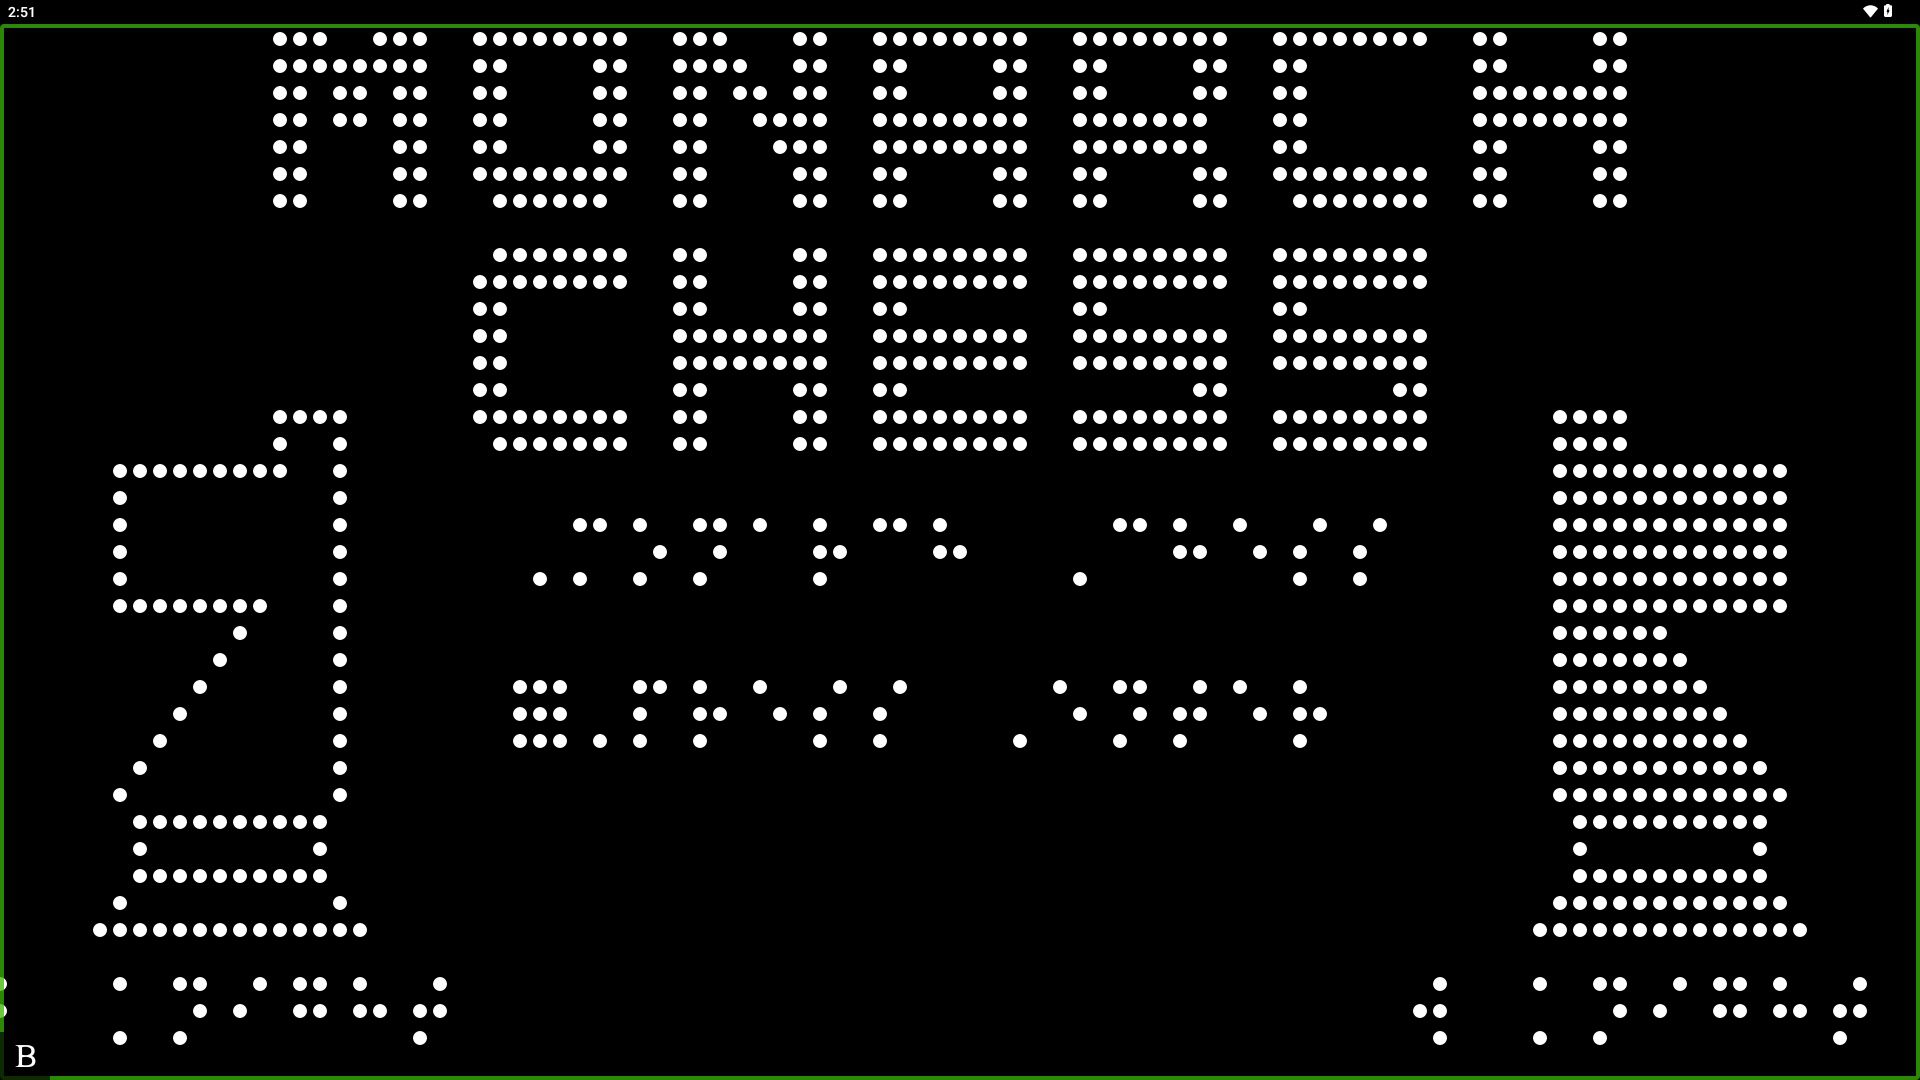 A screenshot of a tactile graphic that says "MONARCH CHESS" in print and braille with two knight chess pieces, one black and one white, on either side of the words facing outward.